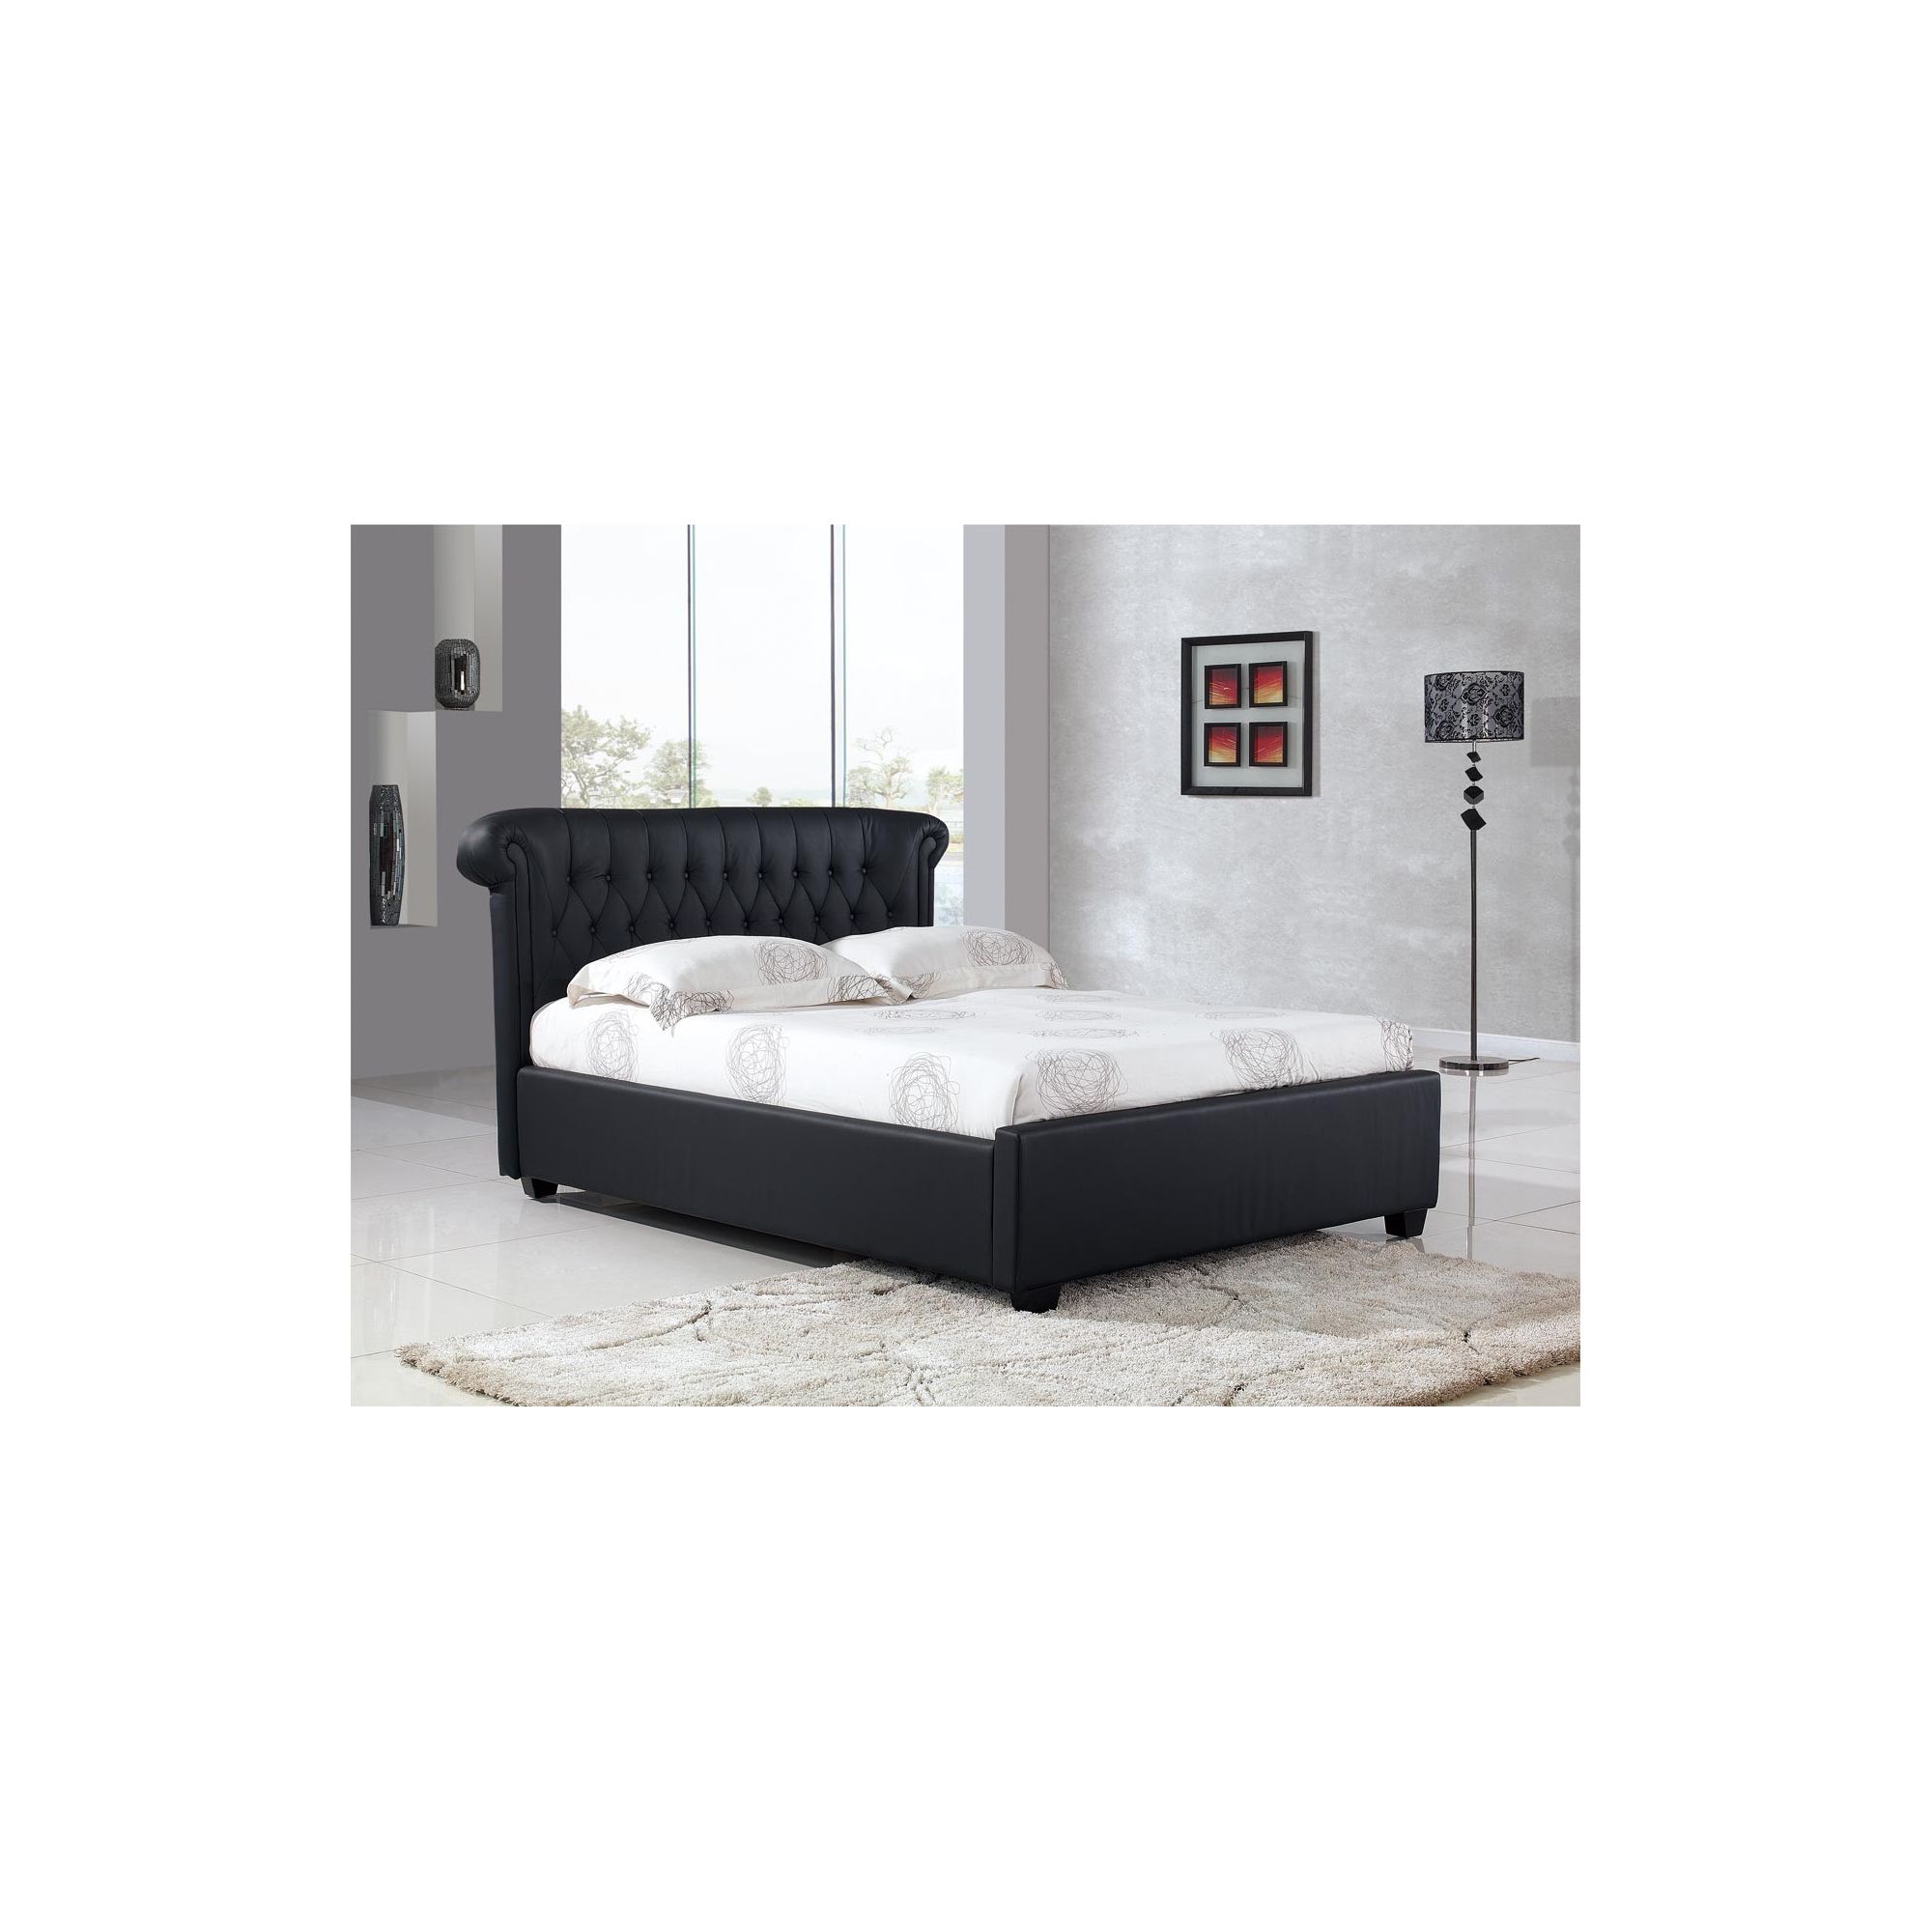 Interiors 2 suit Vienna Bed frame - Double - Black at Tesco Direct